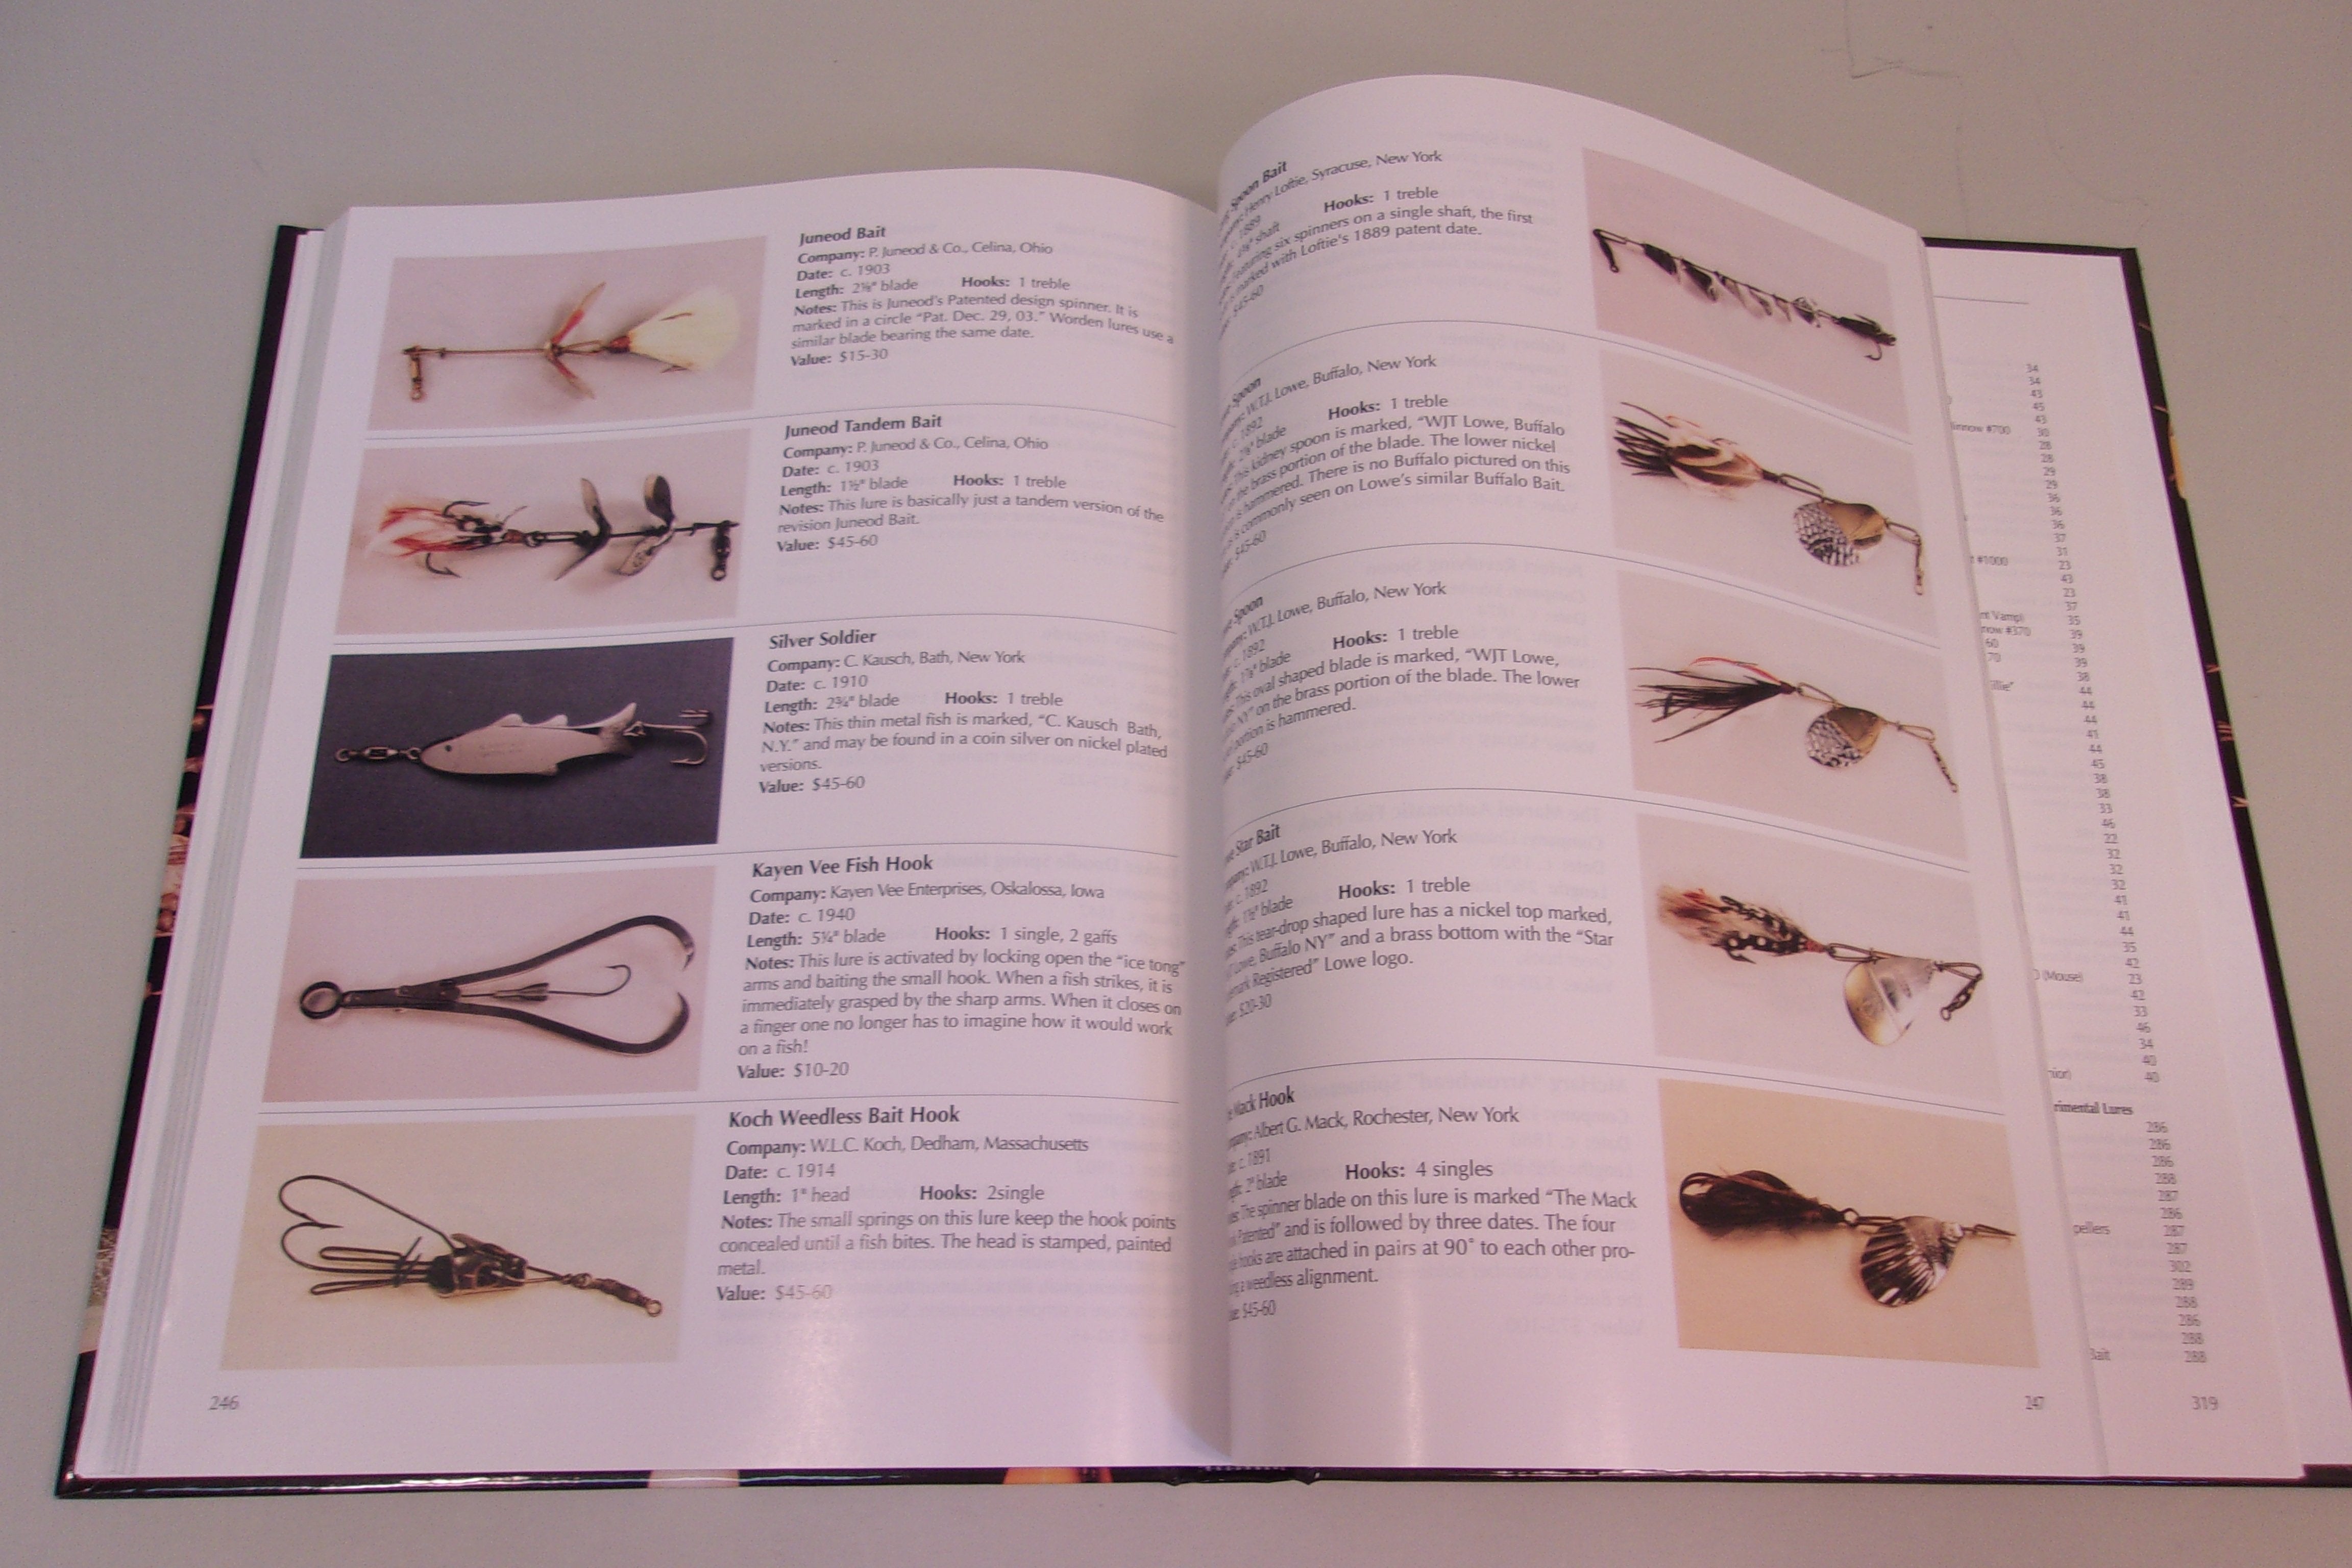 Pre-Owned Fishing Lure Collectibles (Hardcover 9781574321968) by Dudley  Murphy, Rick Edmisten 